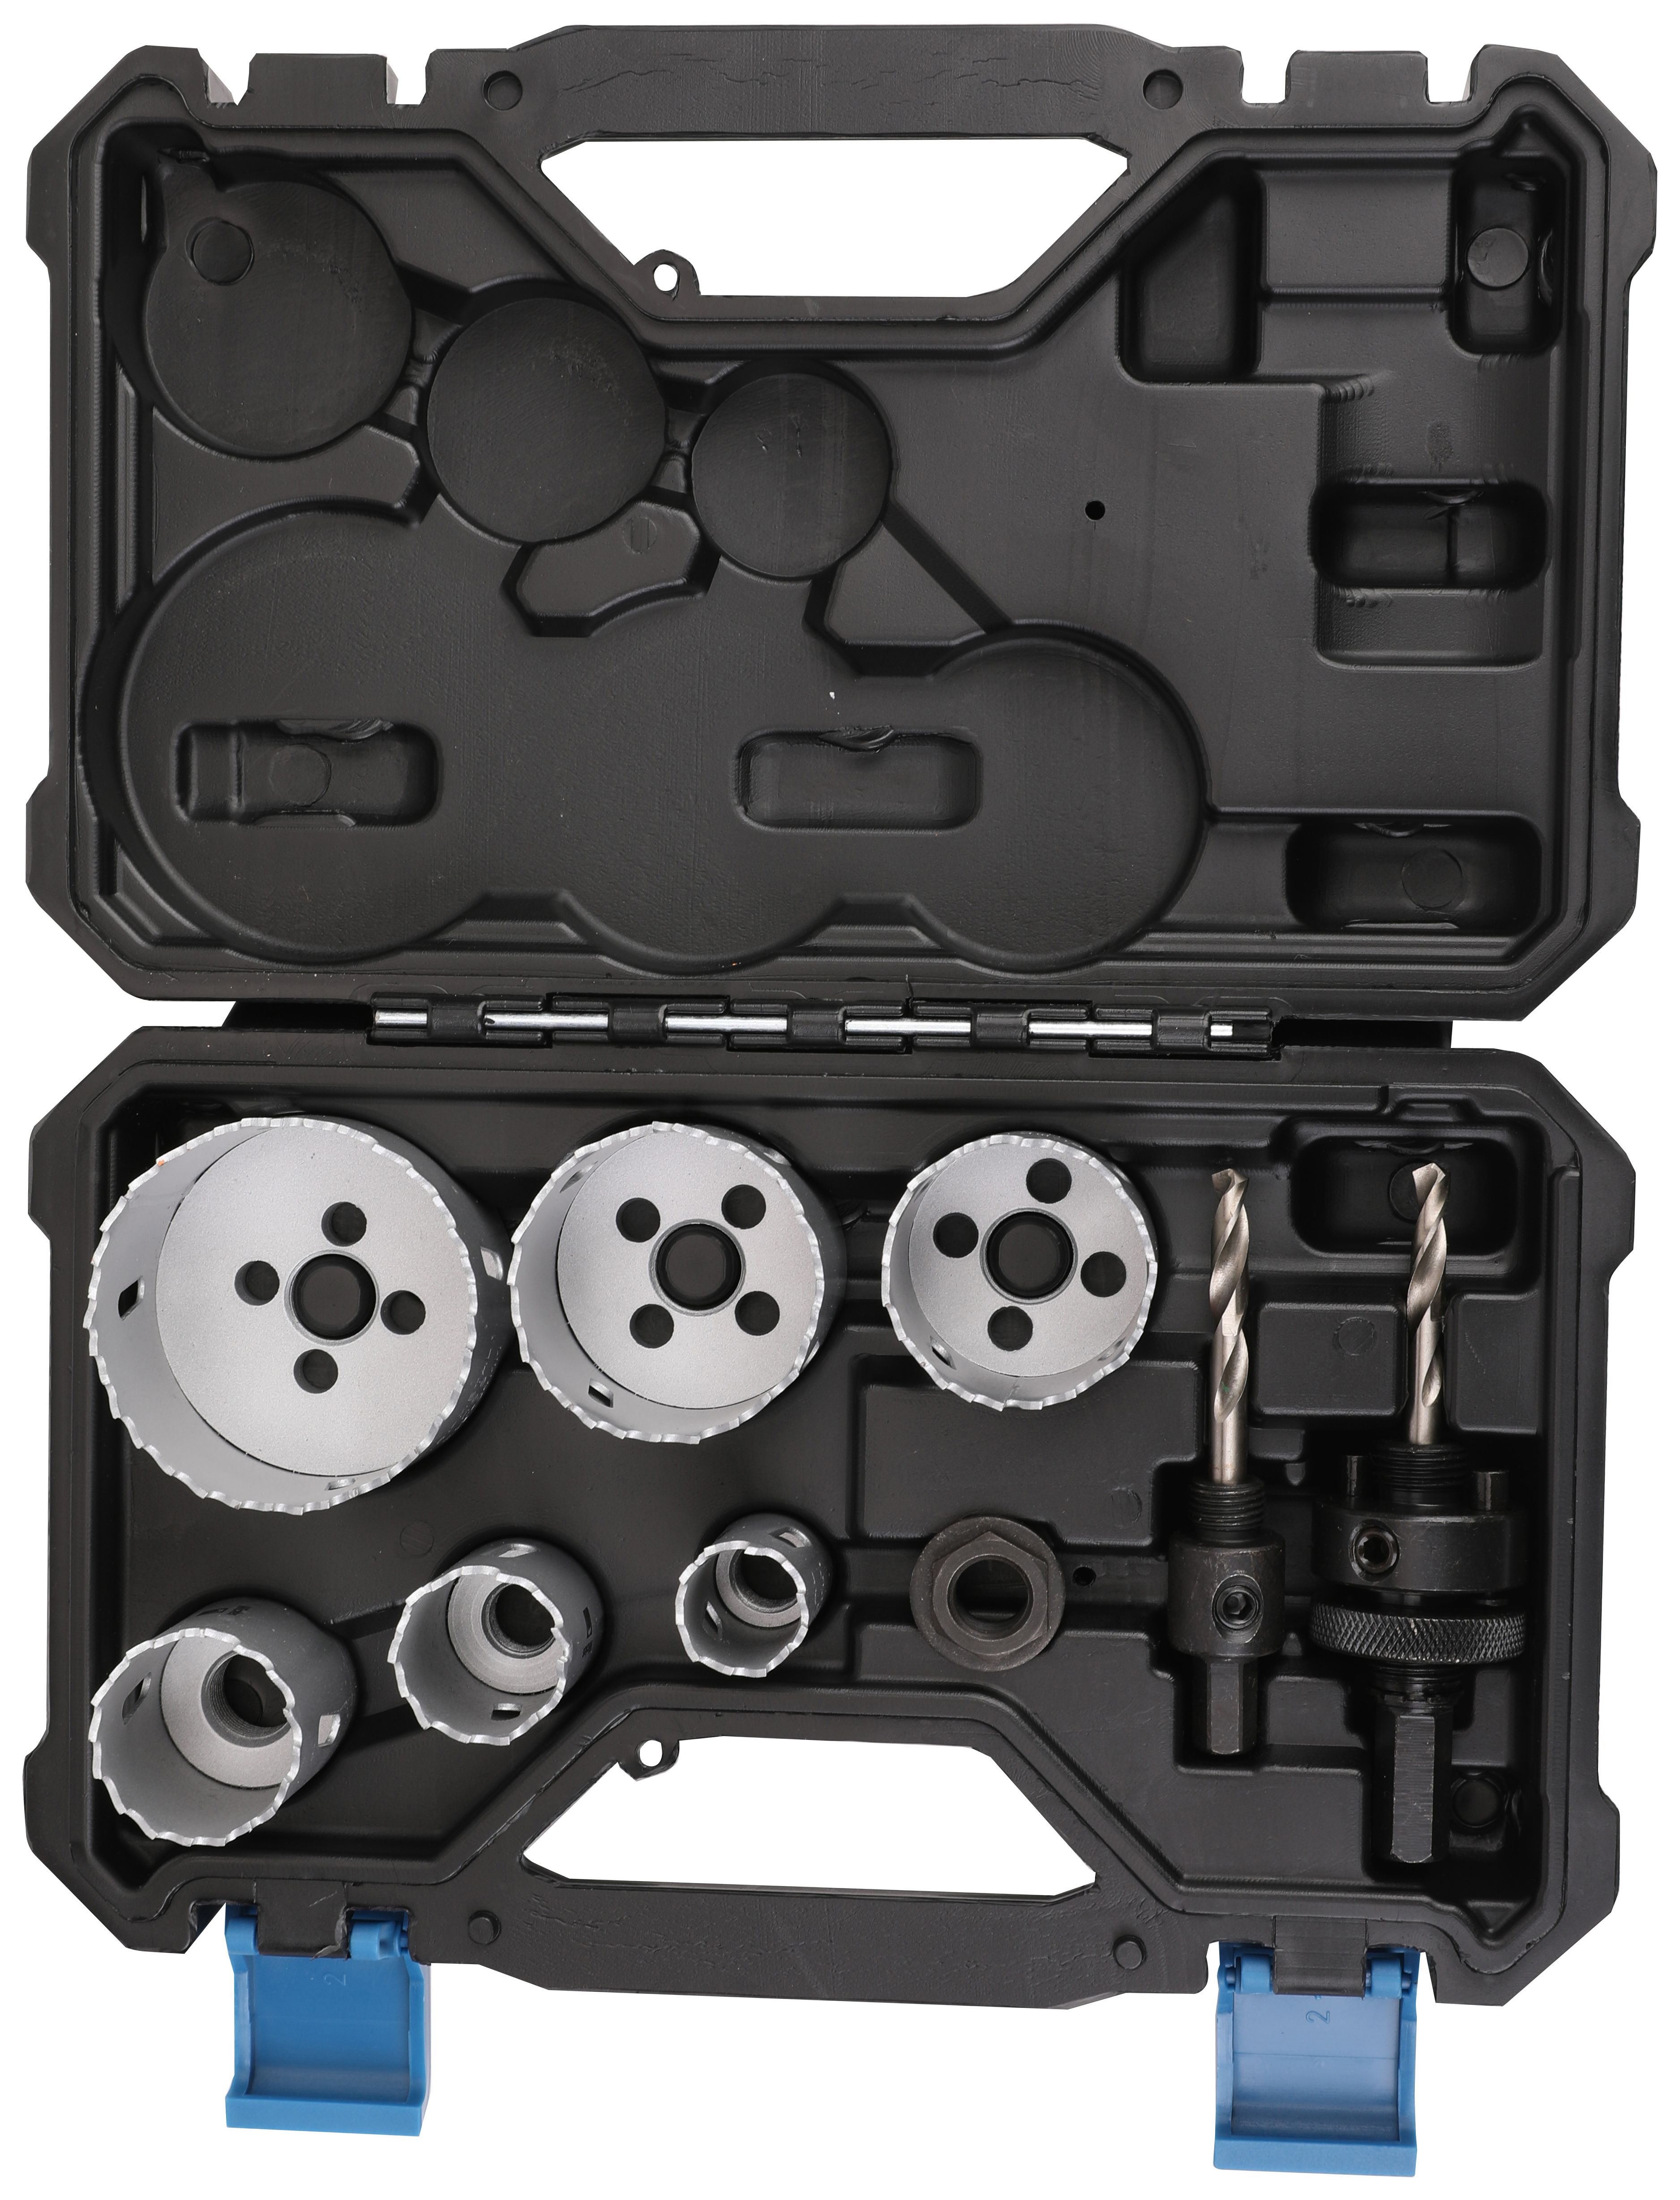 Image of Wickes 6 Piece Electricians Hole Saw Set